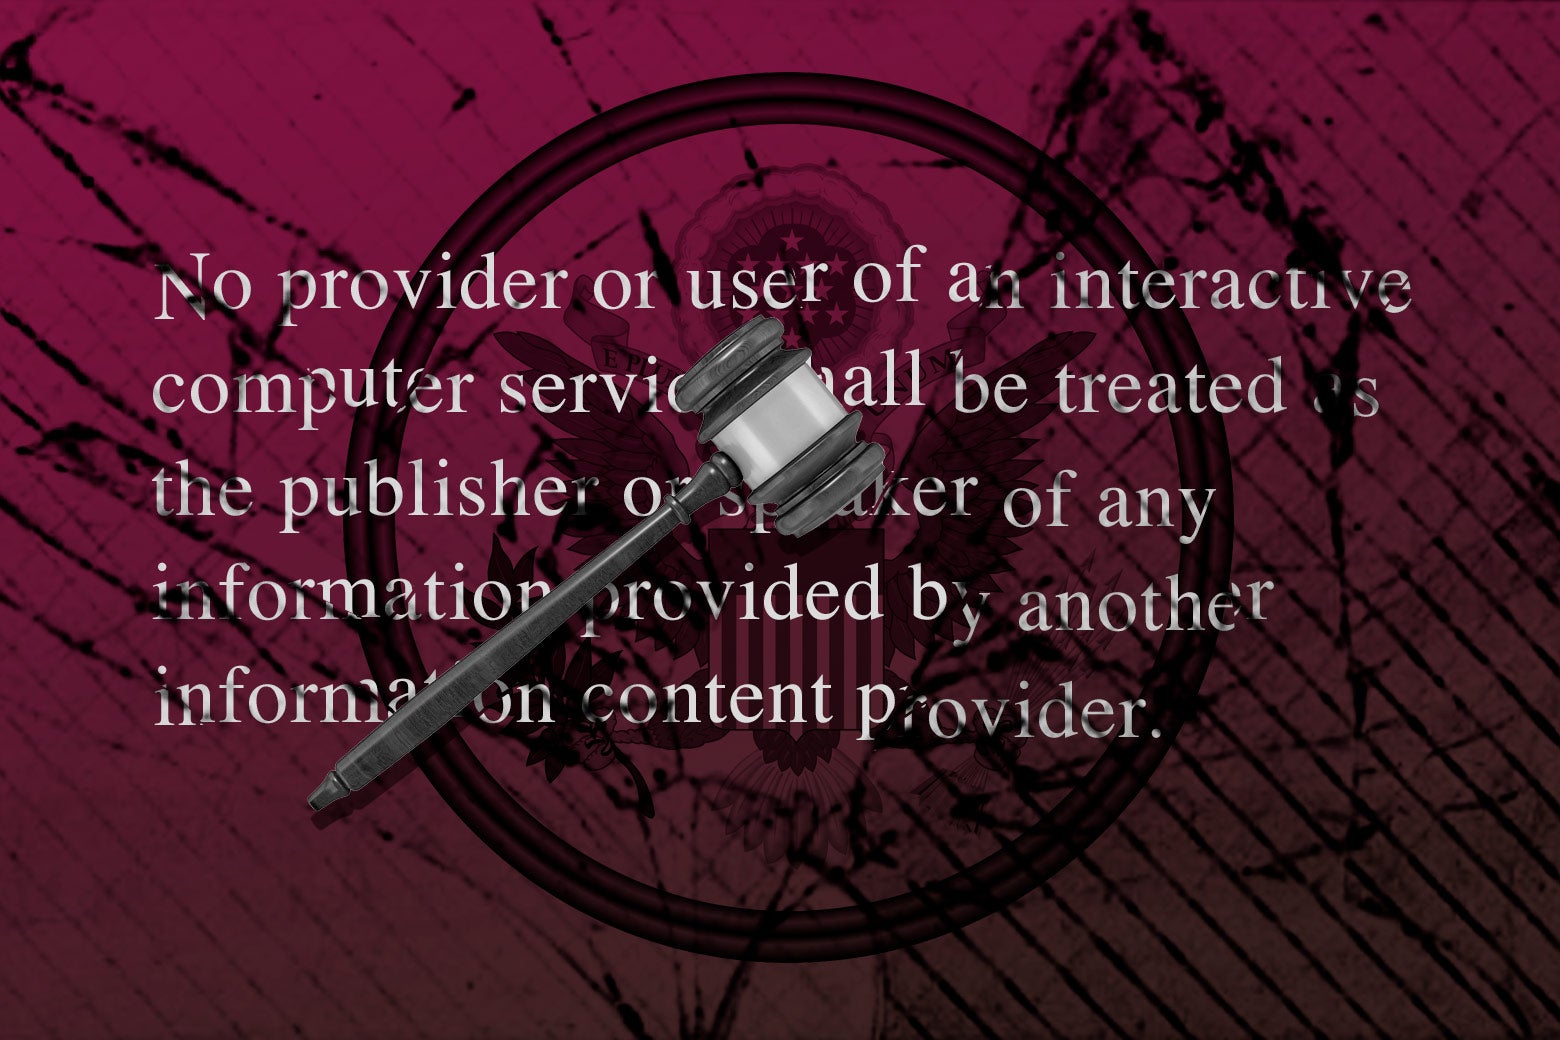 The text of Section 230 (“No provider or user of an interactive computer service shall be treated as the publisher or speaker of any information provided by another information content provider”) overlaid with an image of a gavel.